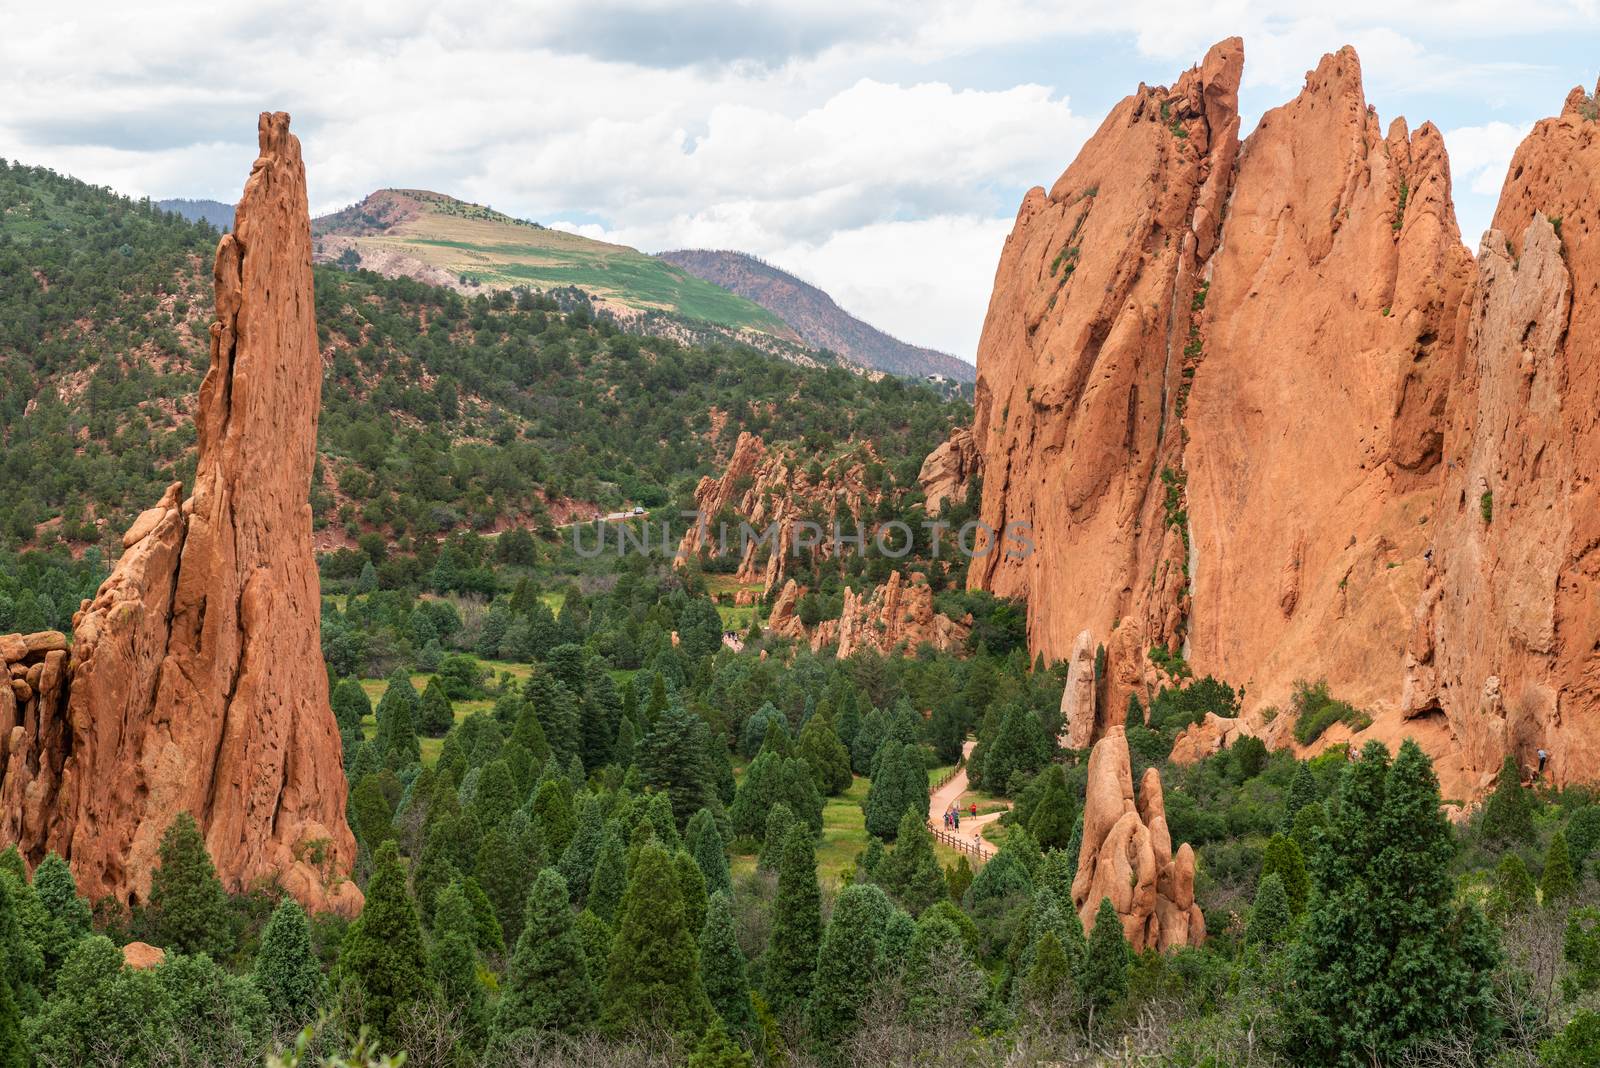 Views of sandstone formations along Central Garden Trail in Garden of the Gods, Colorado by Njean